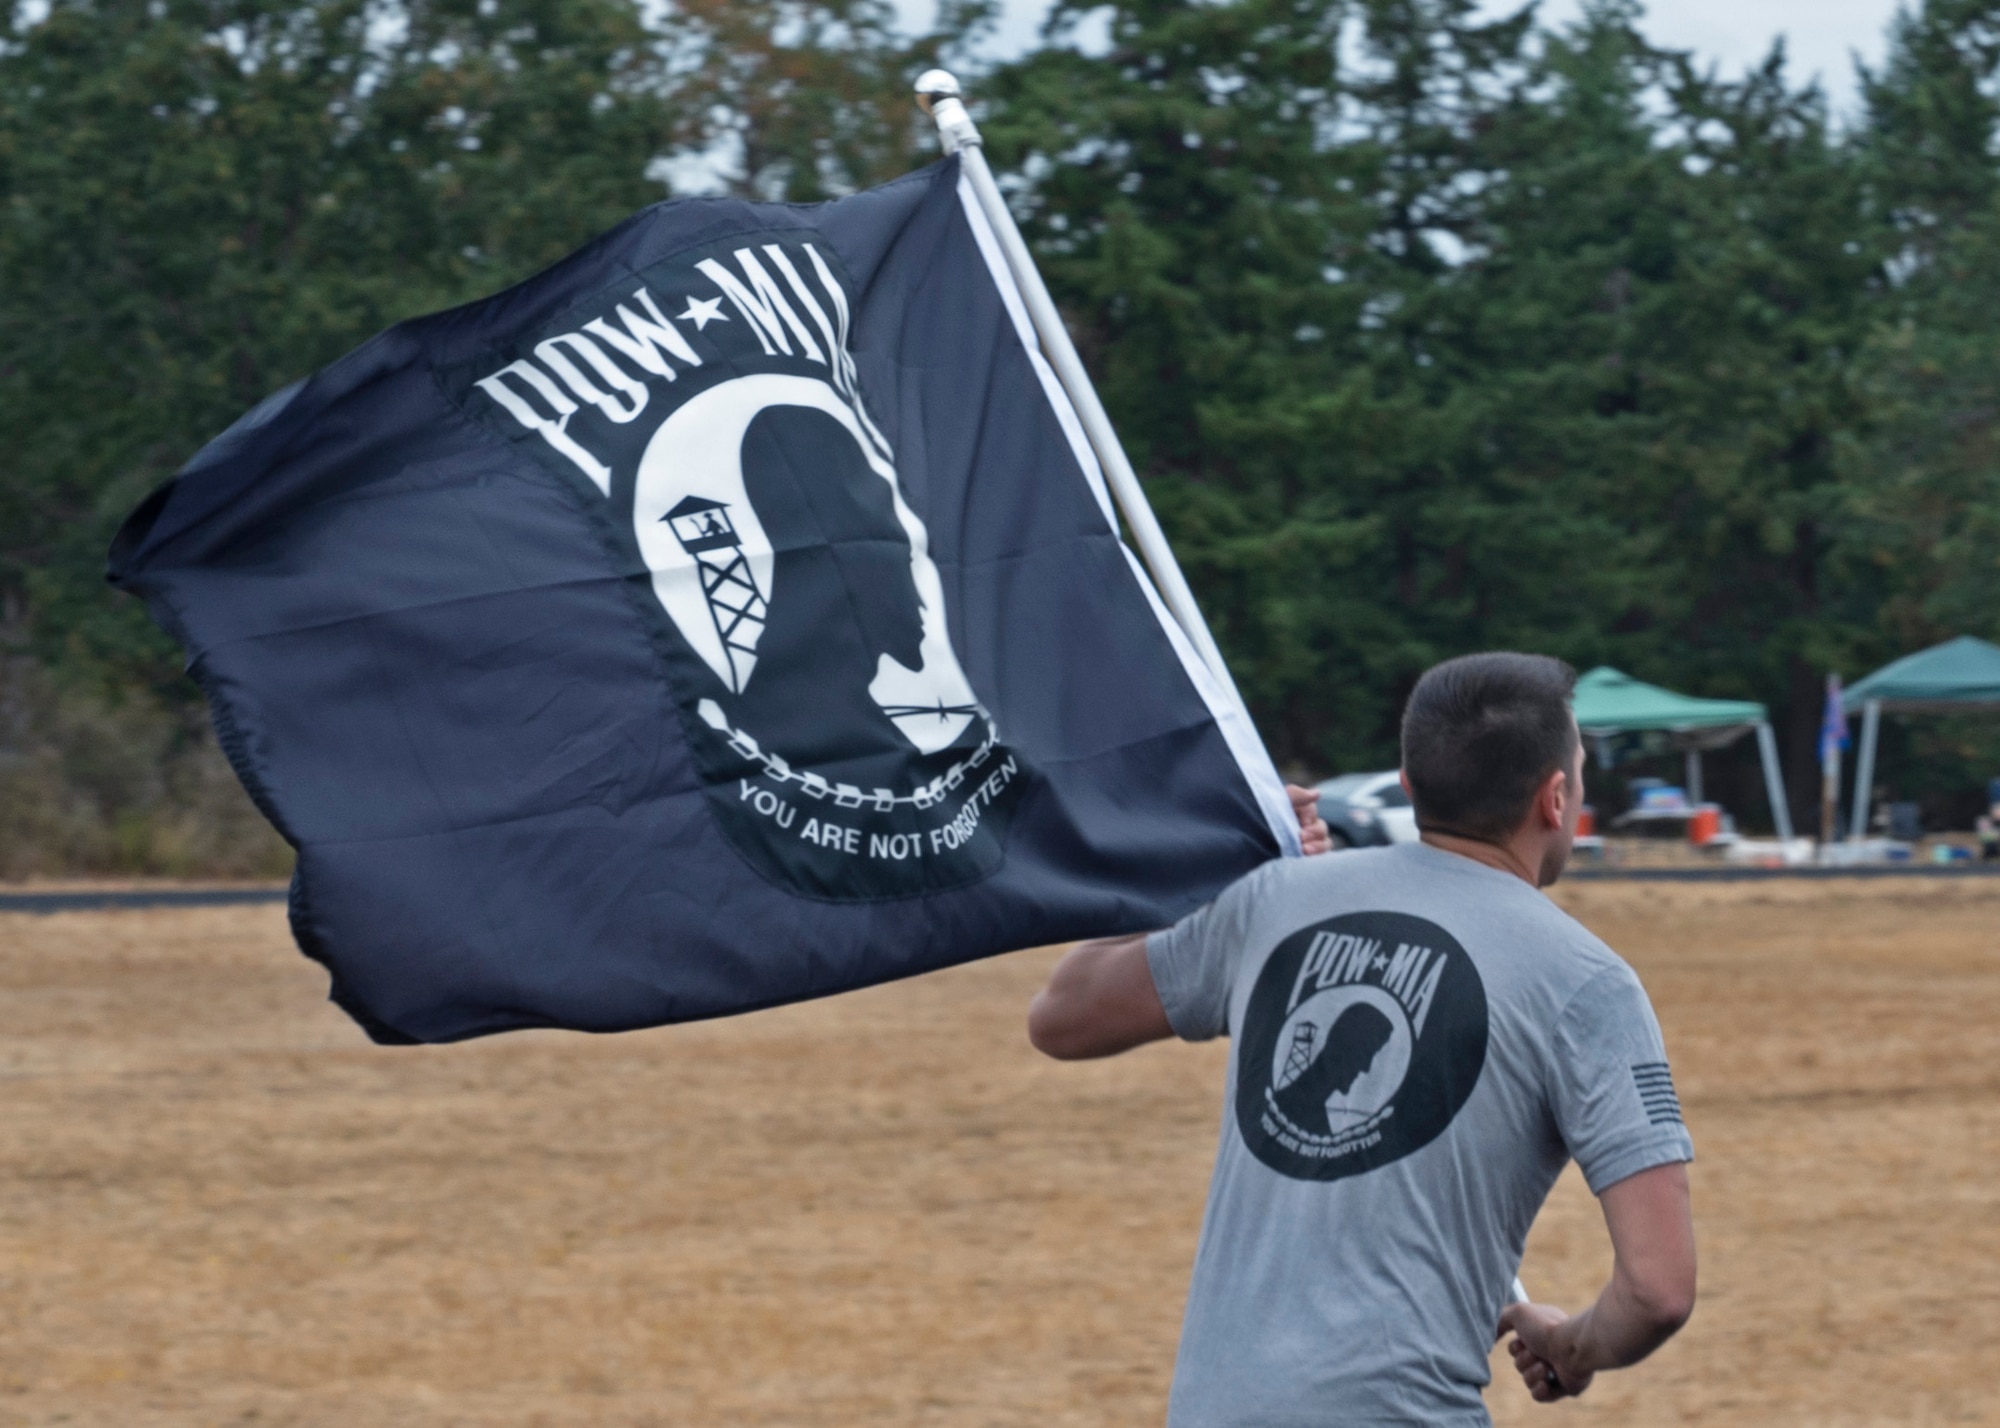 U.S. Air Force Senior Master Sgt. Daniel Cain, 62nd Comptroller Squadron superintendent, runs with the POW/MIA flag during a 24-hour remembrance run at Joint Base Lewis-McChord, Washington, Sept. 15, 2021. Team McChord planned several events this week to honor the lives and sacrifices of those men and women who were prisoners of war or missing in action, including a Missing Man Table and Honors Ceremony, a community motorcycle ride and a wreath laying ceremony. (U.S. Air Force photo by Senior Airman Zoe Thacker)